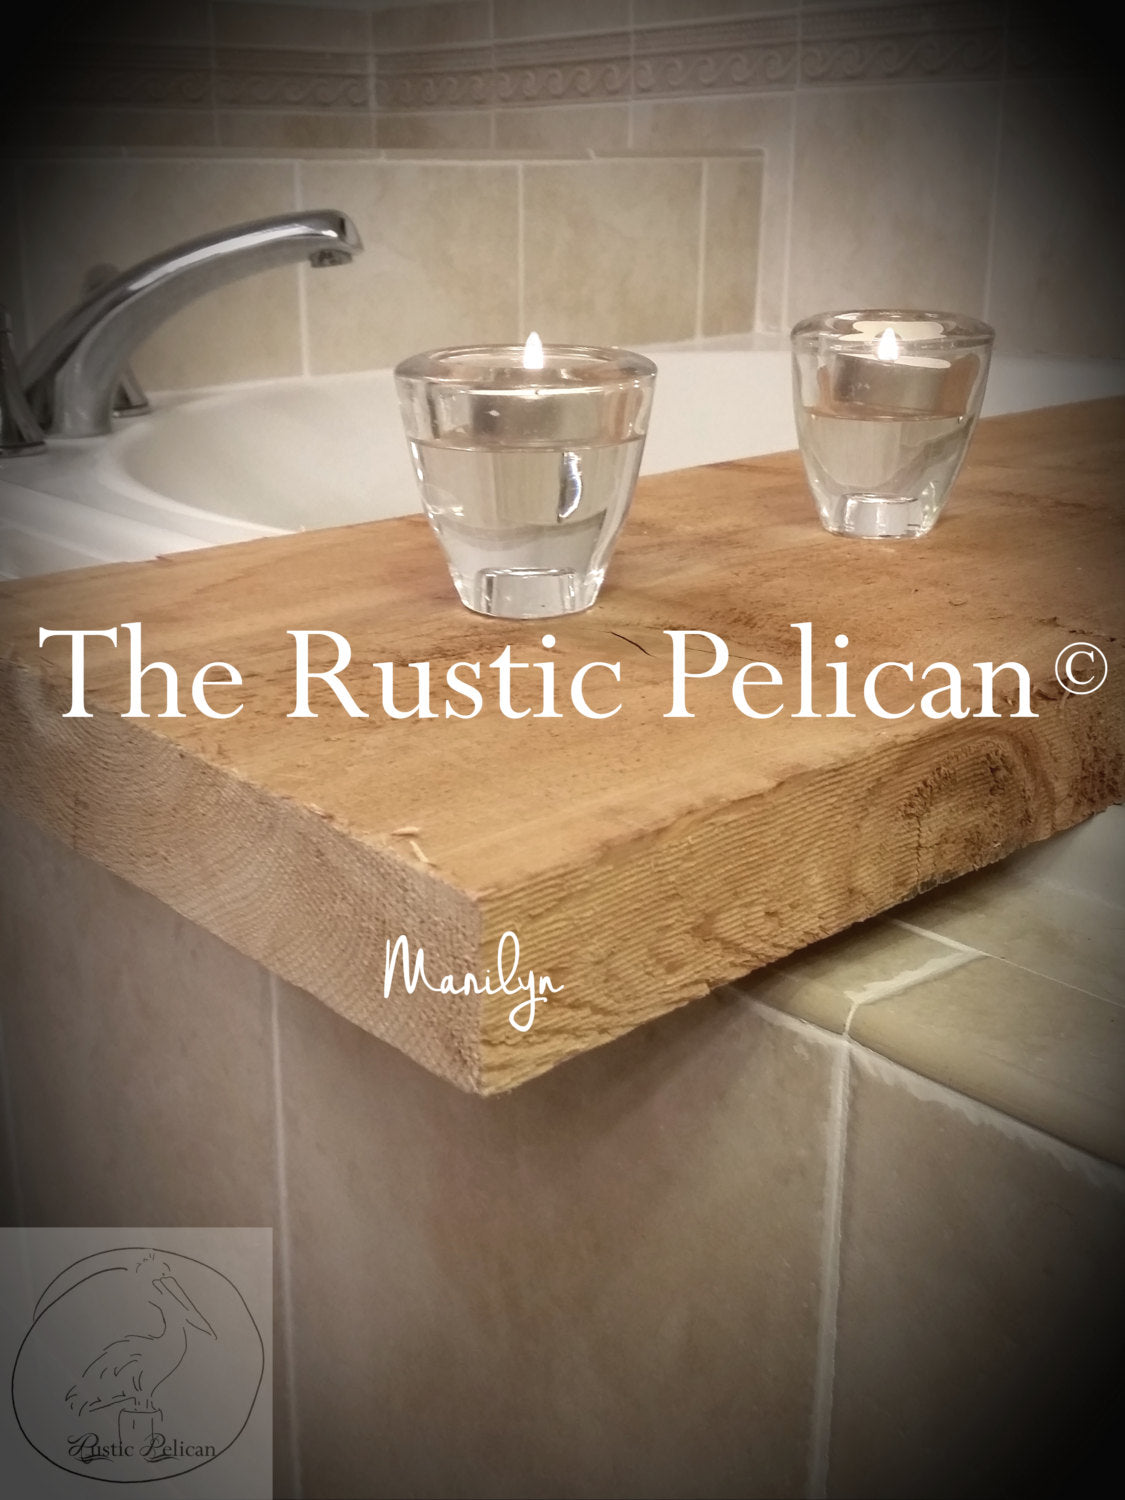 Bath Tray - Shower Caddy - FREE SHIPPING - The Rustic Pelican